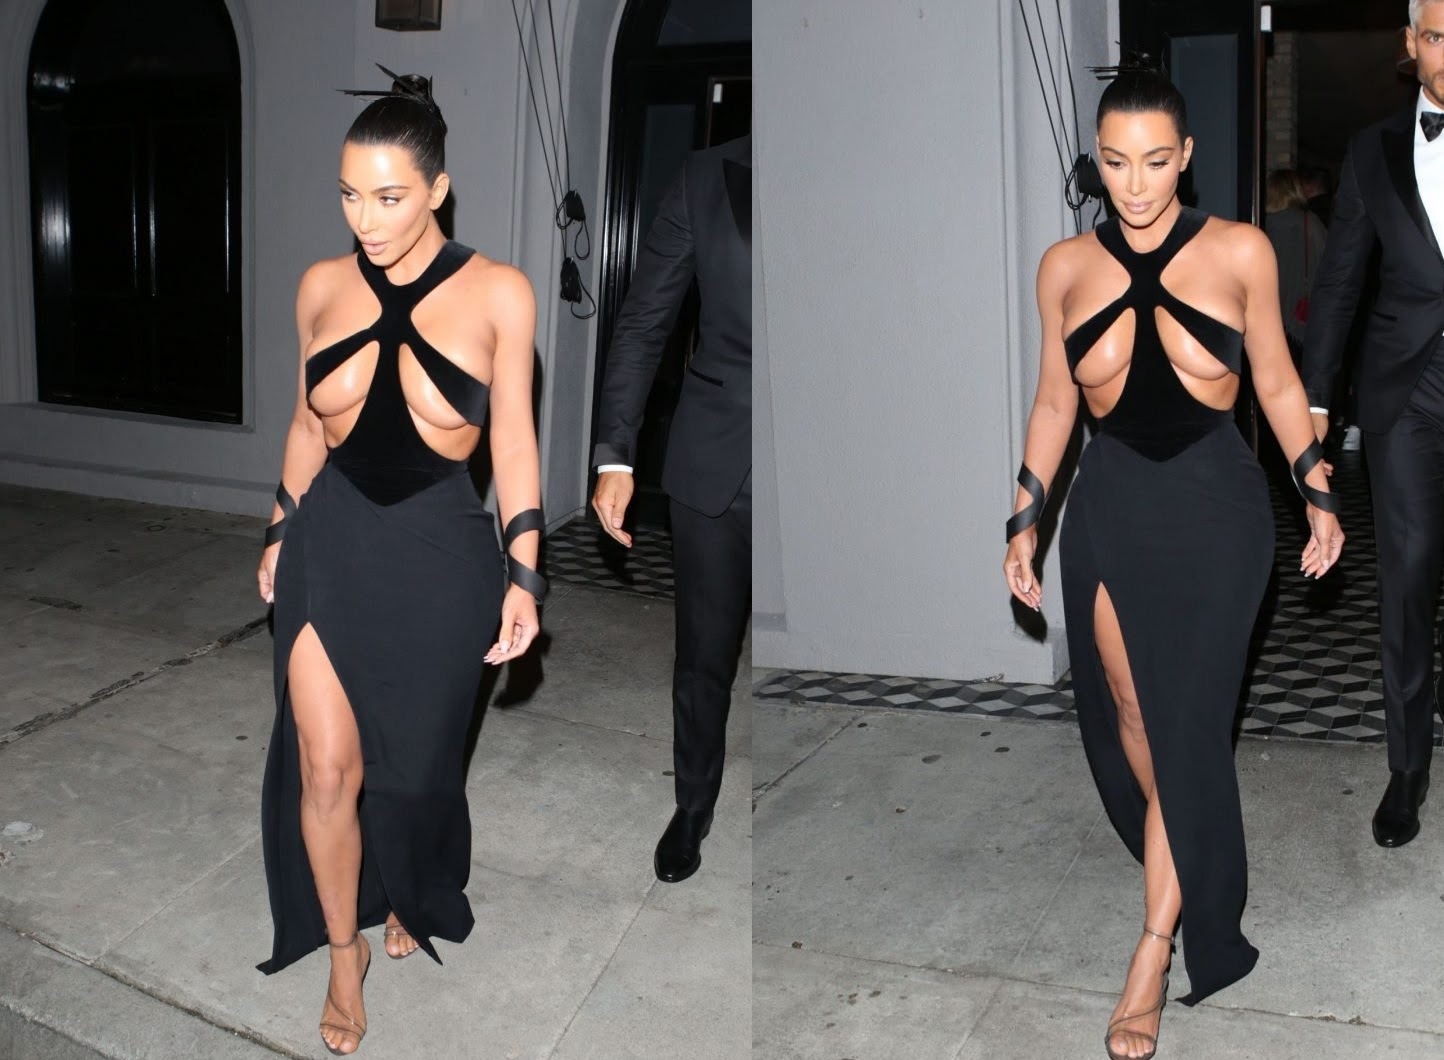 Kim Kardashian's Most Iconic Outfits Of All Times With Best Outfits and Style Moments.